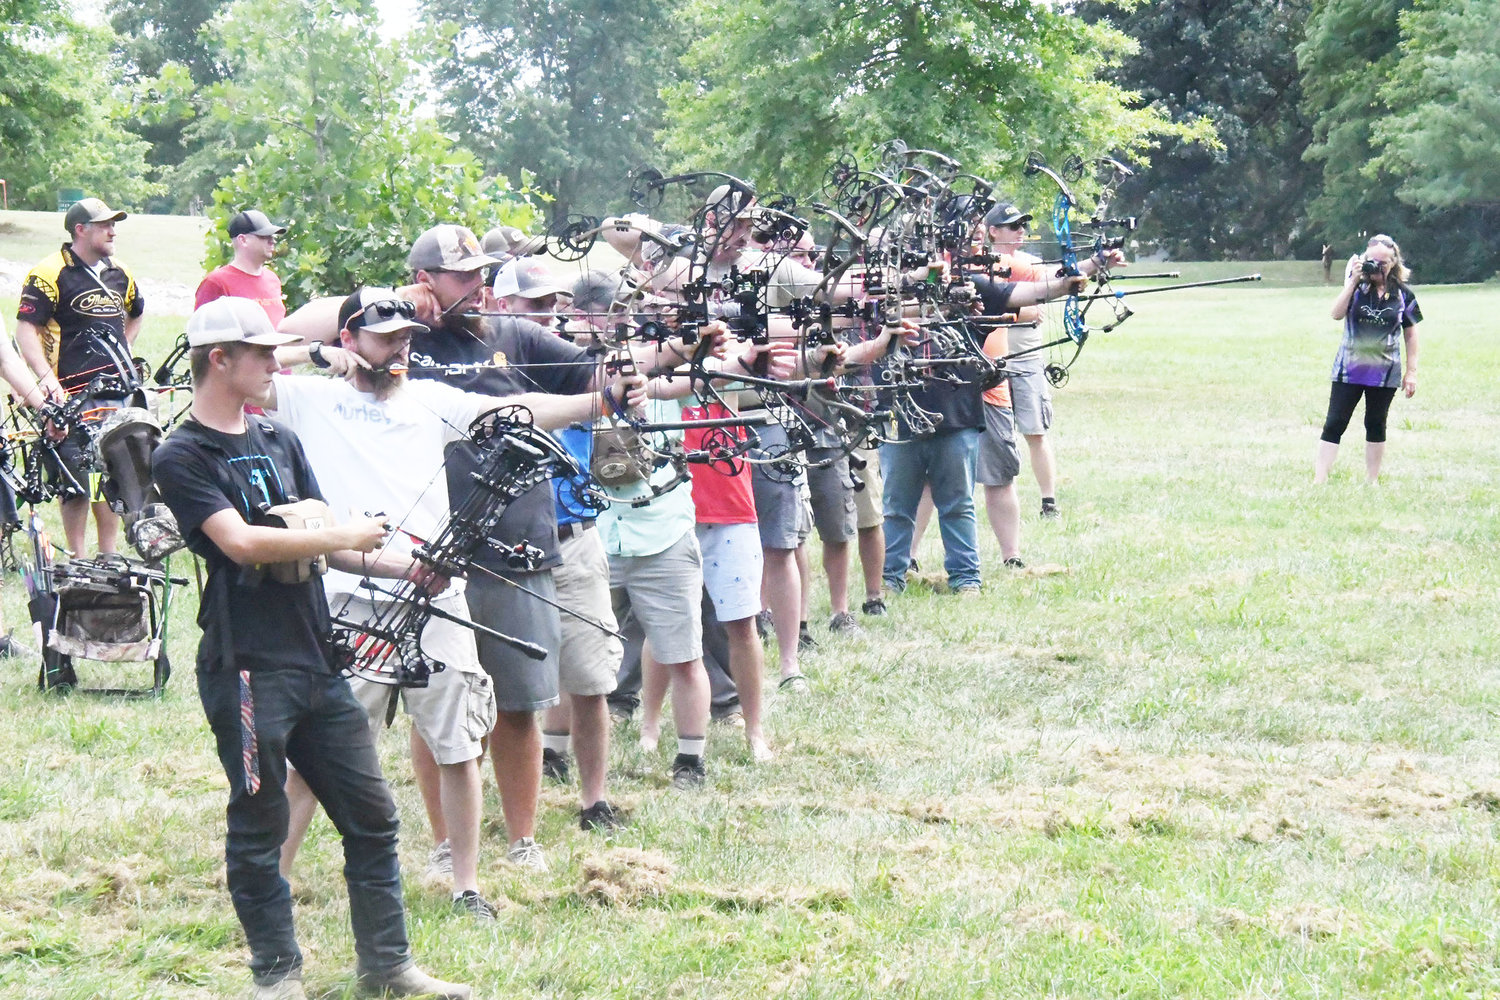 Archers, the line is hot. There were nearly 30 contestants in the Badlands Iron Buck shooting competition.